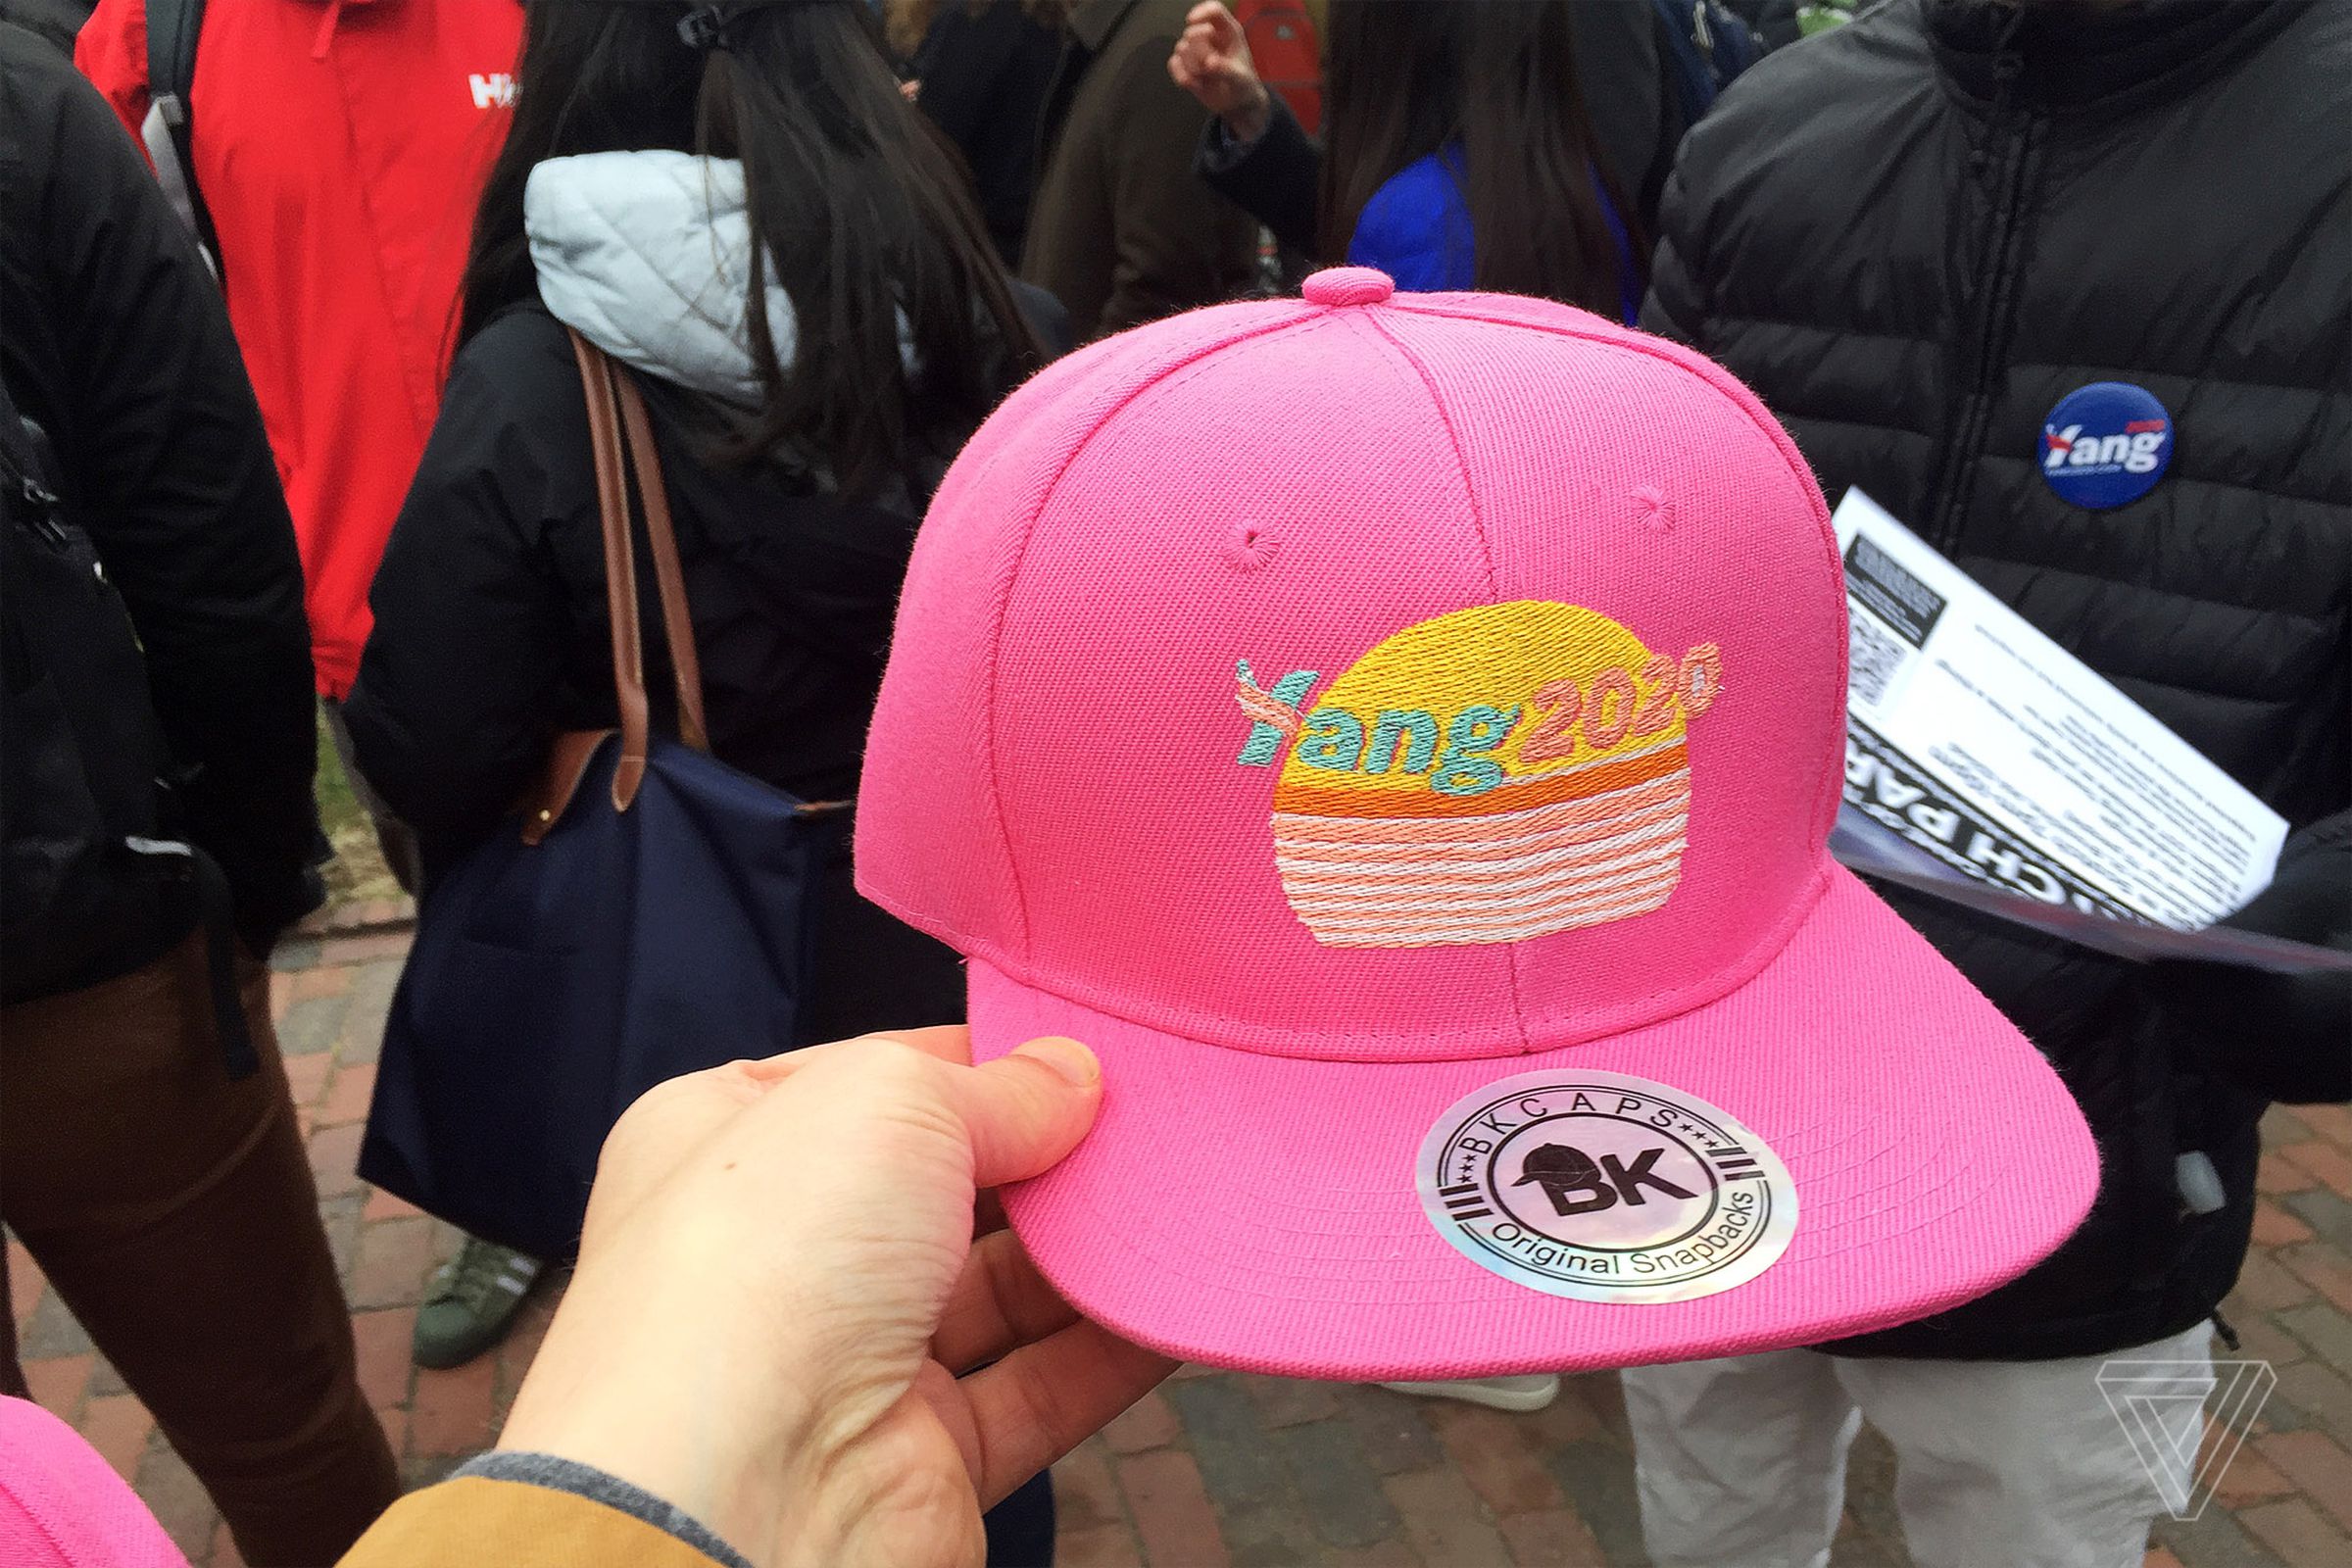 A bootleg Yang2020 hat being sold at the Boston rally.